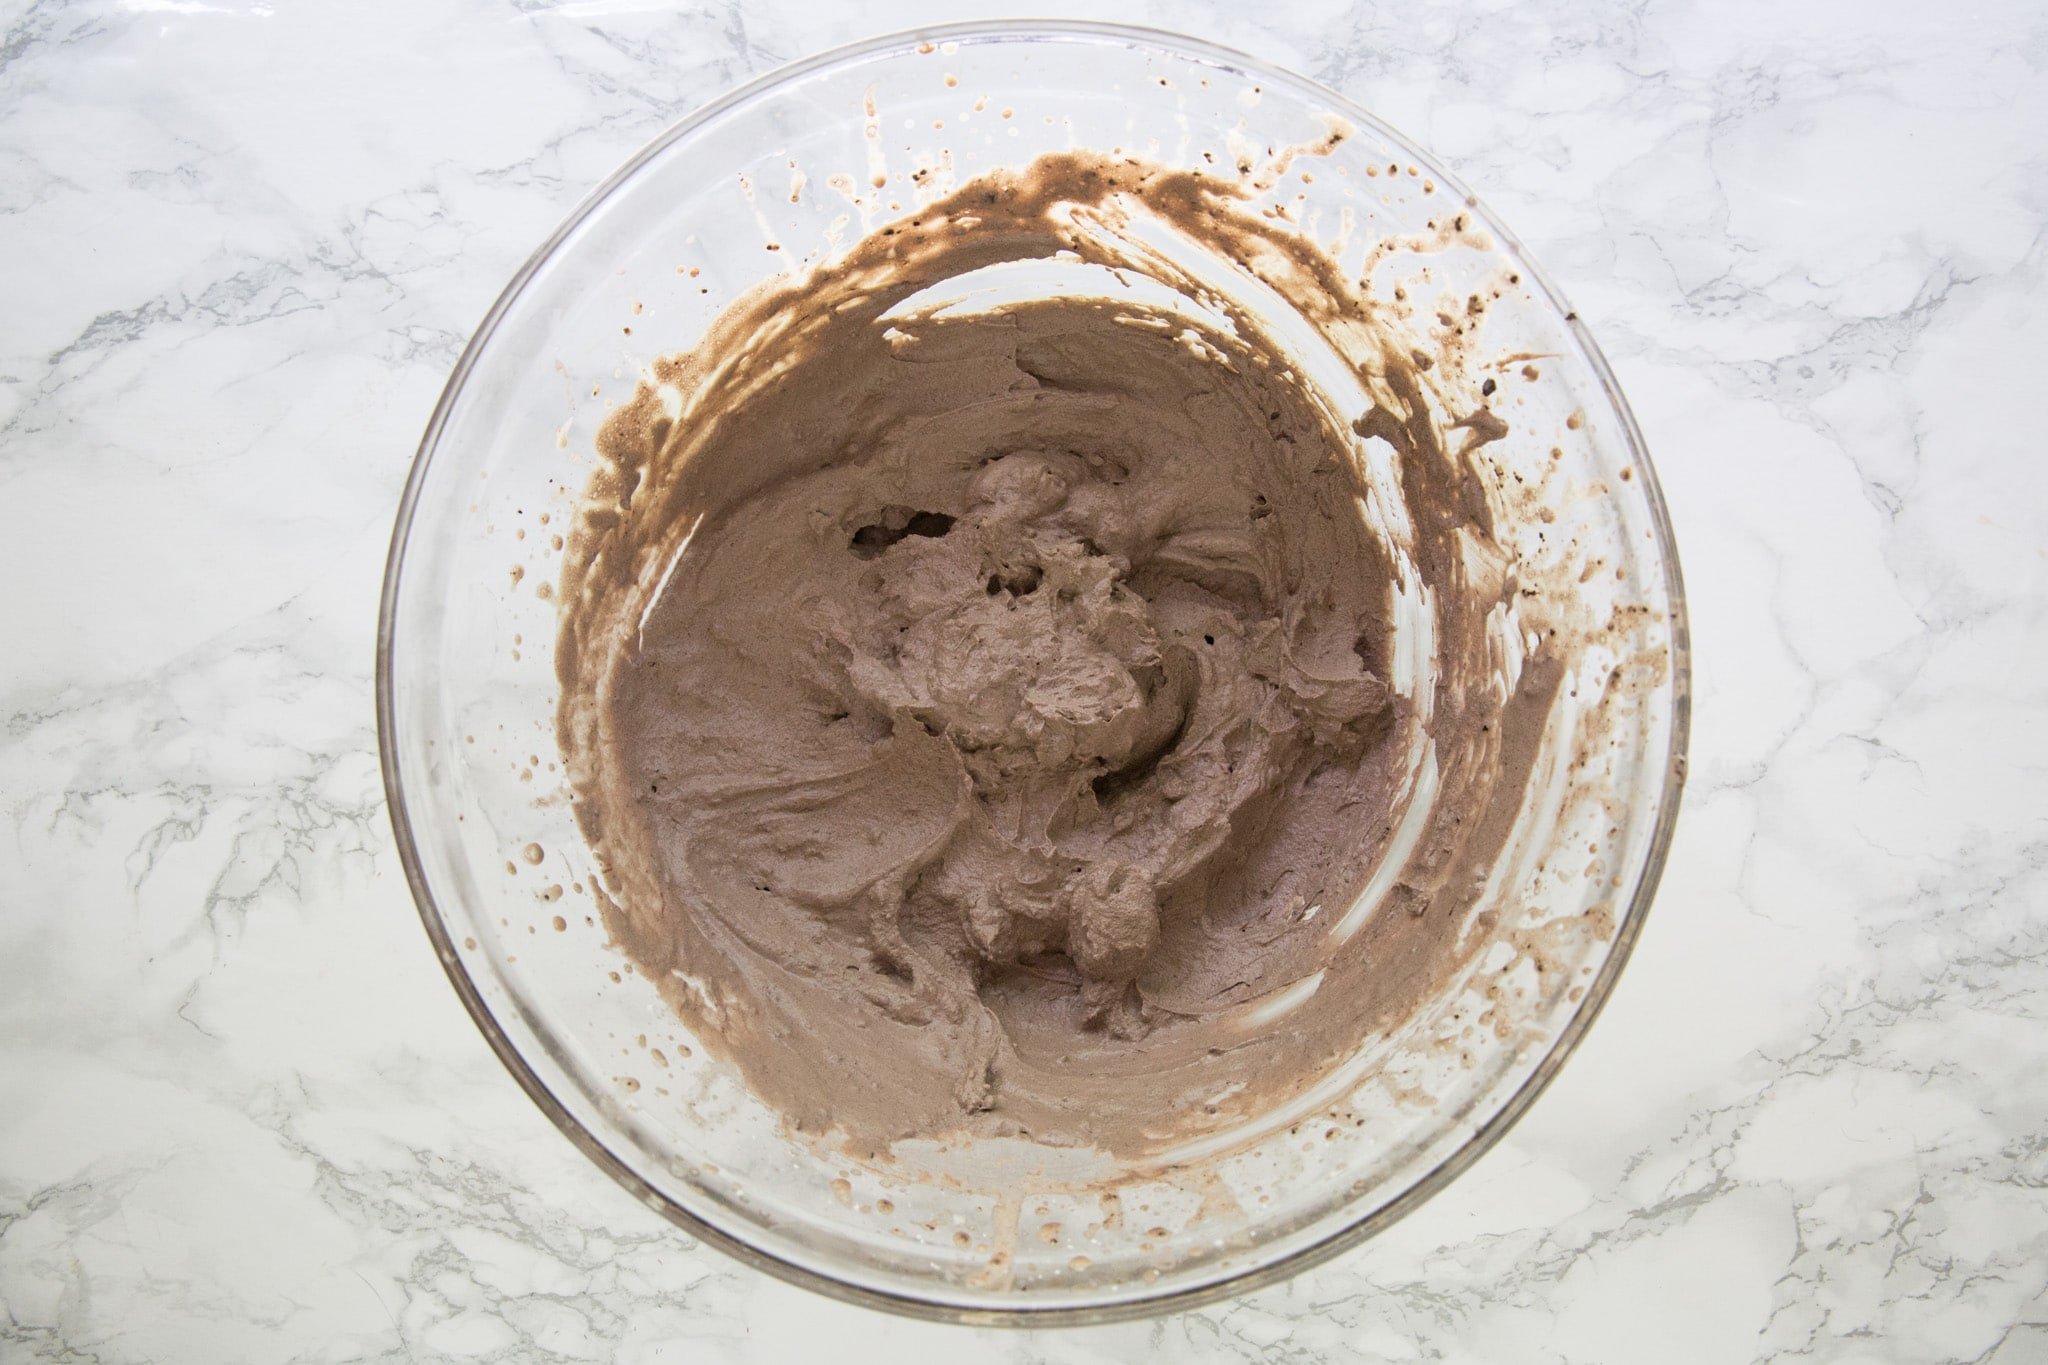 Mocha Chocolate Fat Bombs are delicious keto-friendly sweet treats that don't go over your macros! Make our low carb fat bombs in minutes and serve up to your friends and family, or sneak for yourself when nobody is looking!